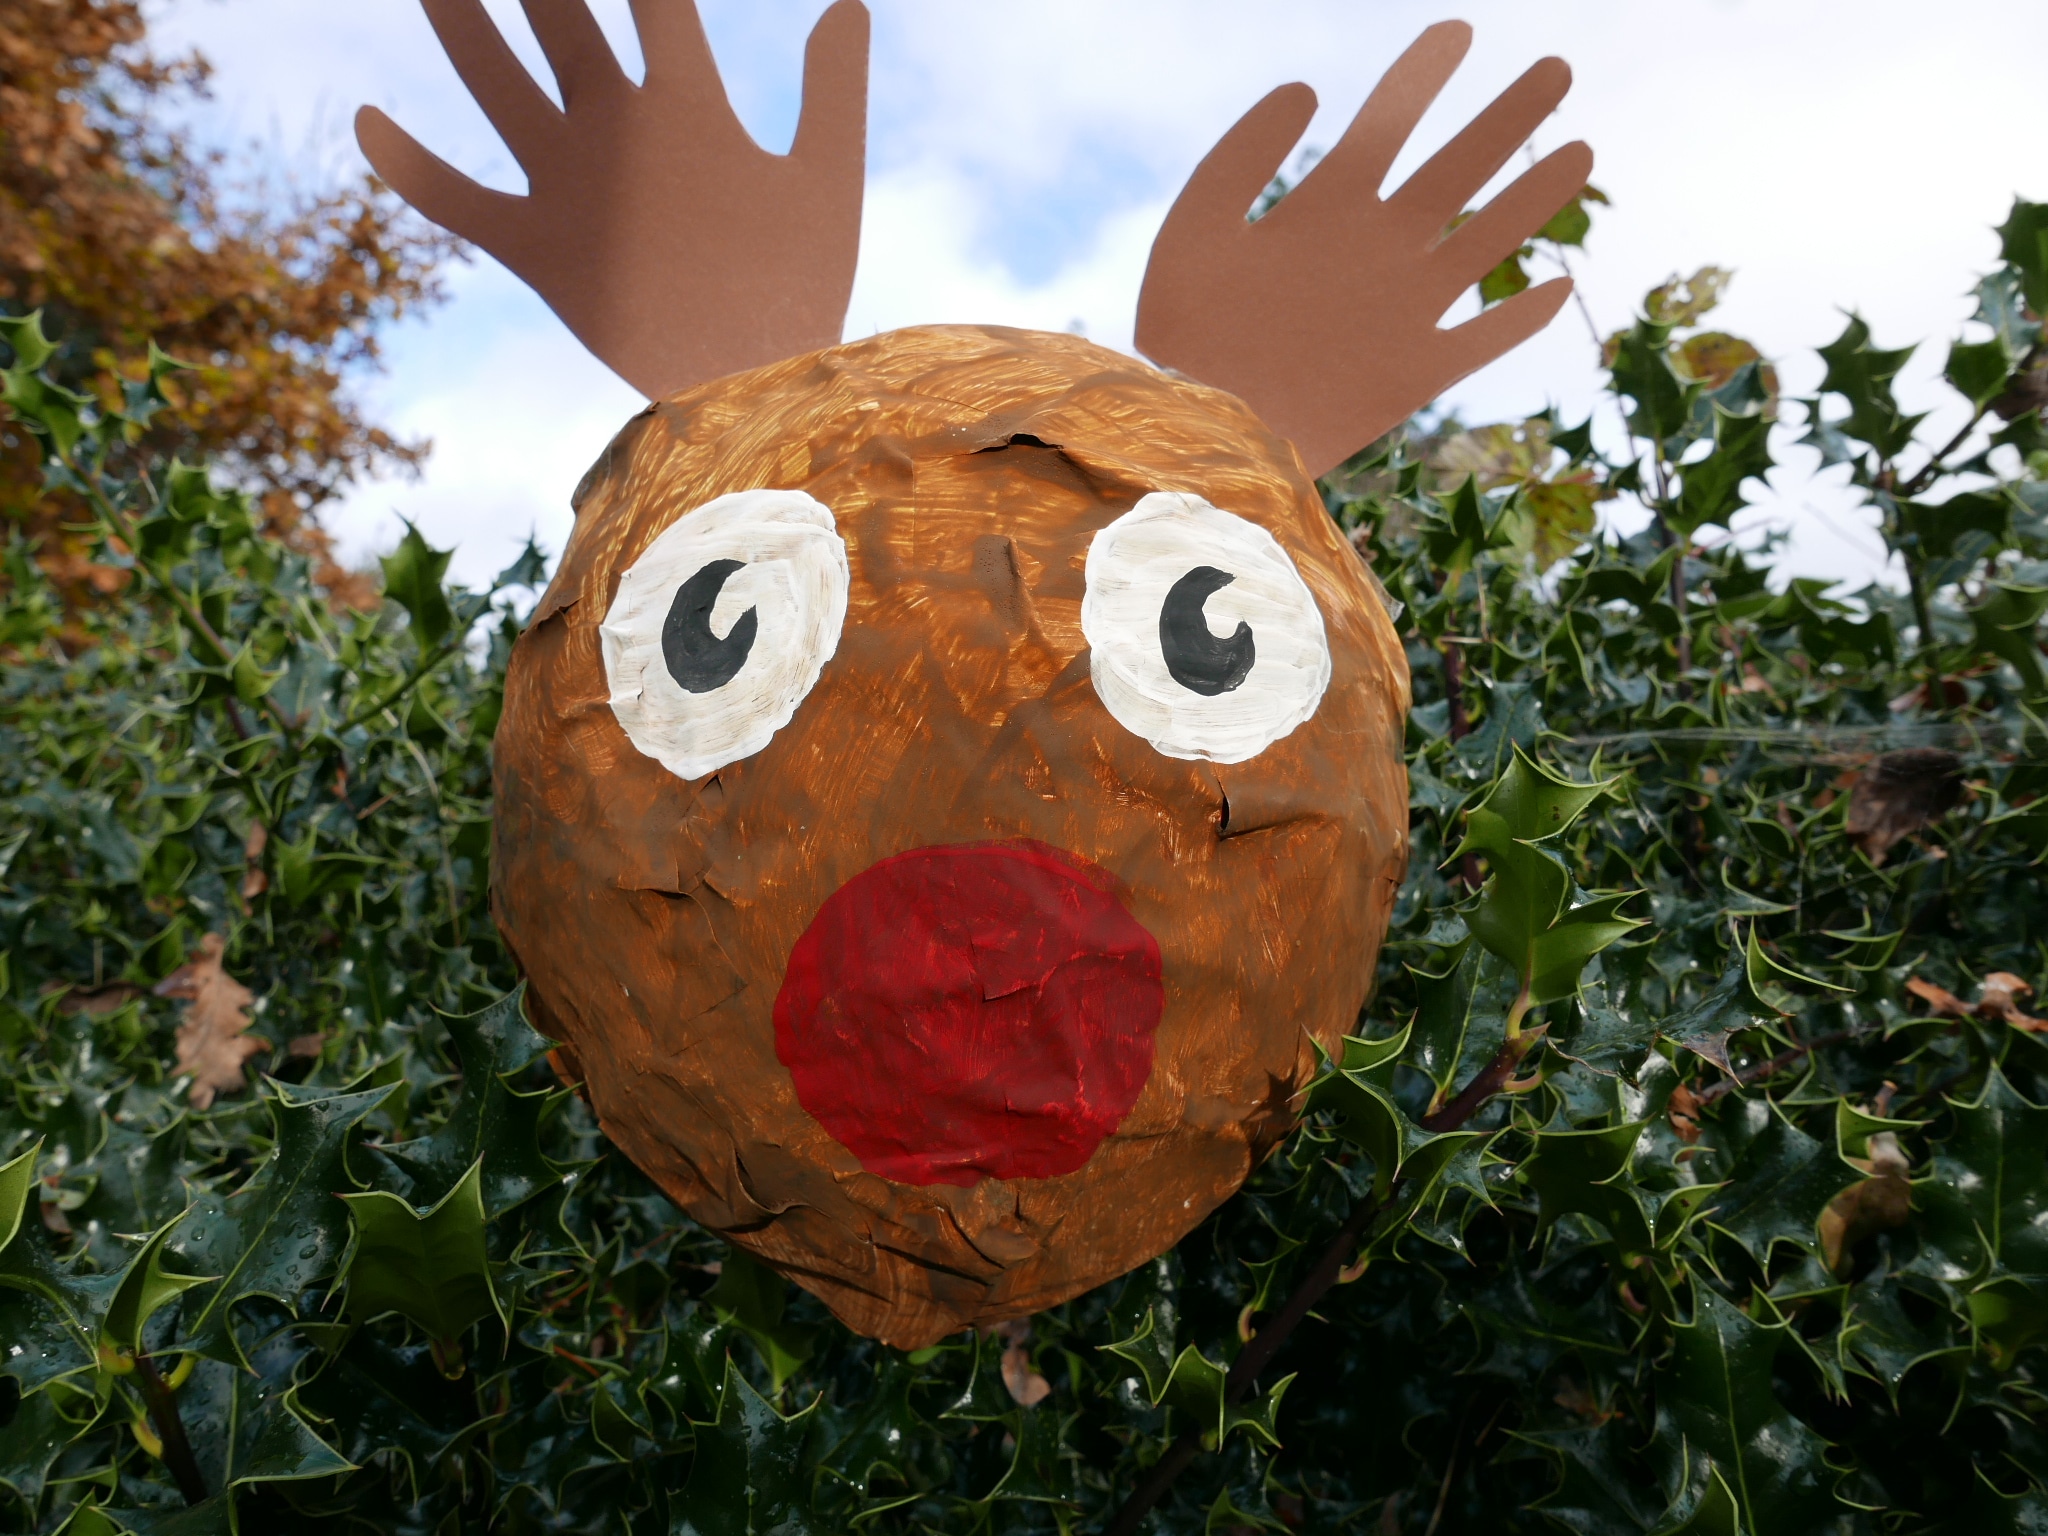 Christmas paper mache craft ideas – Childsplayabc ~ Nature is our playground